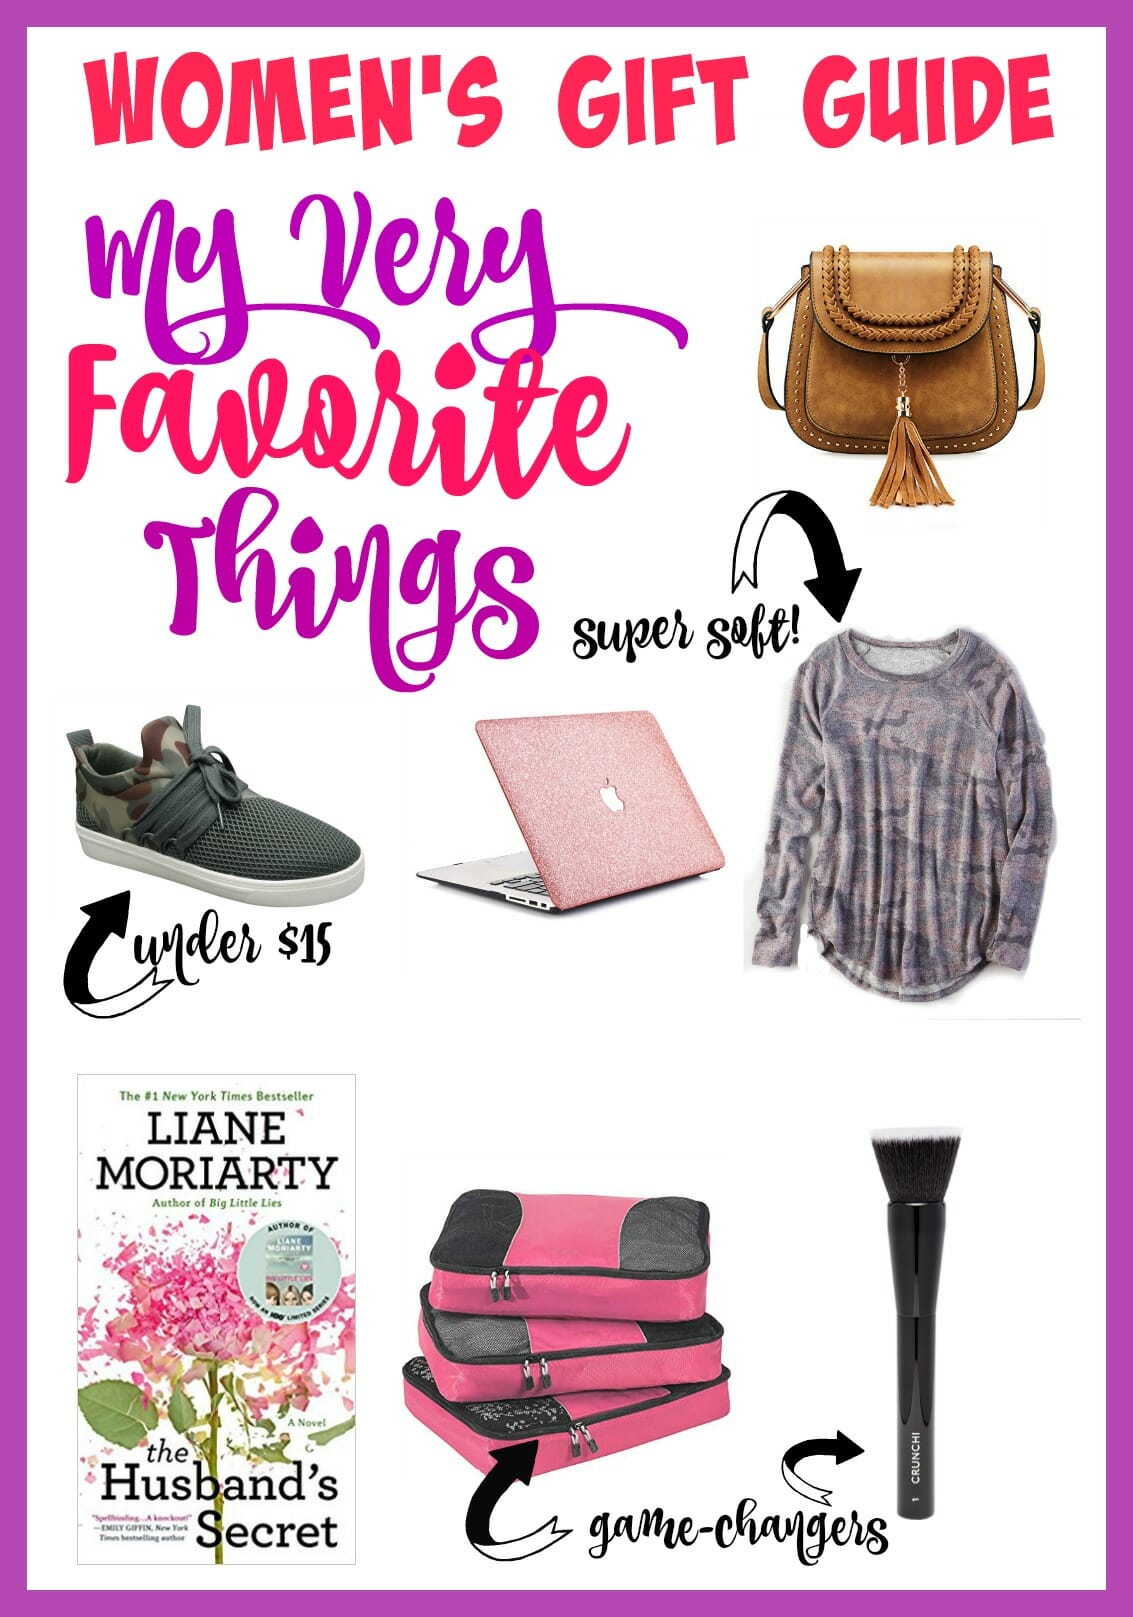 My Very Favorite Things A Gift Guide for Women